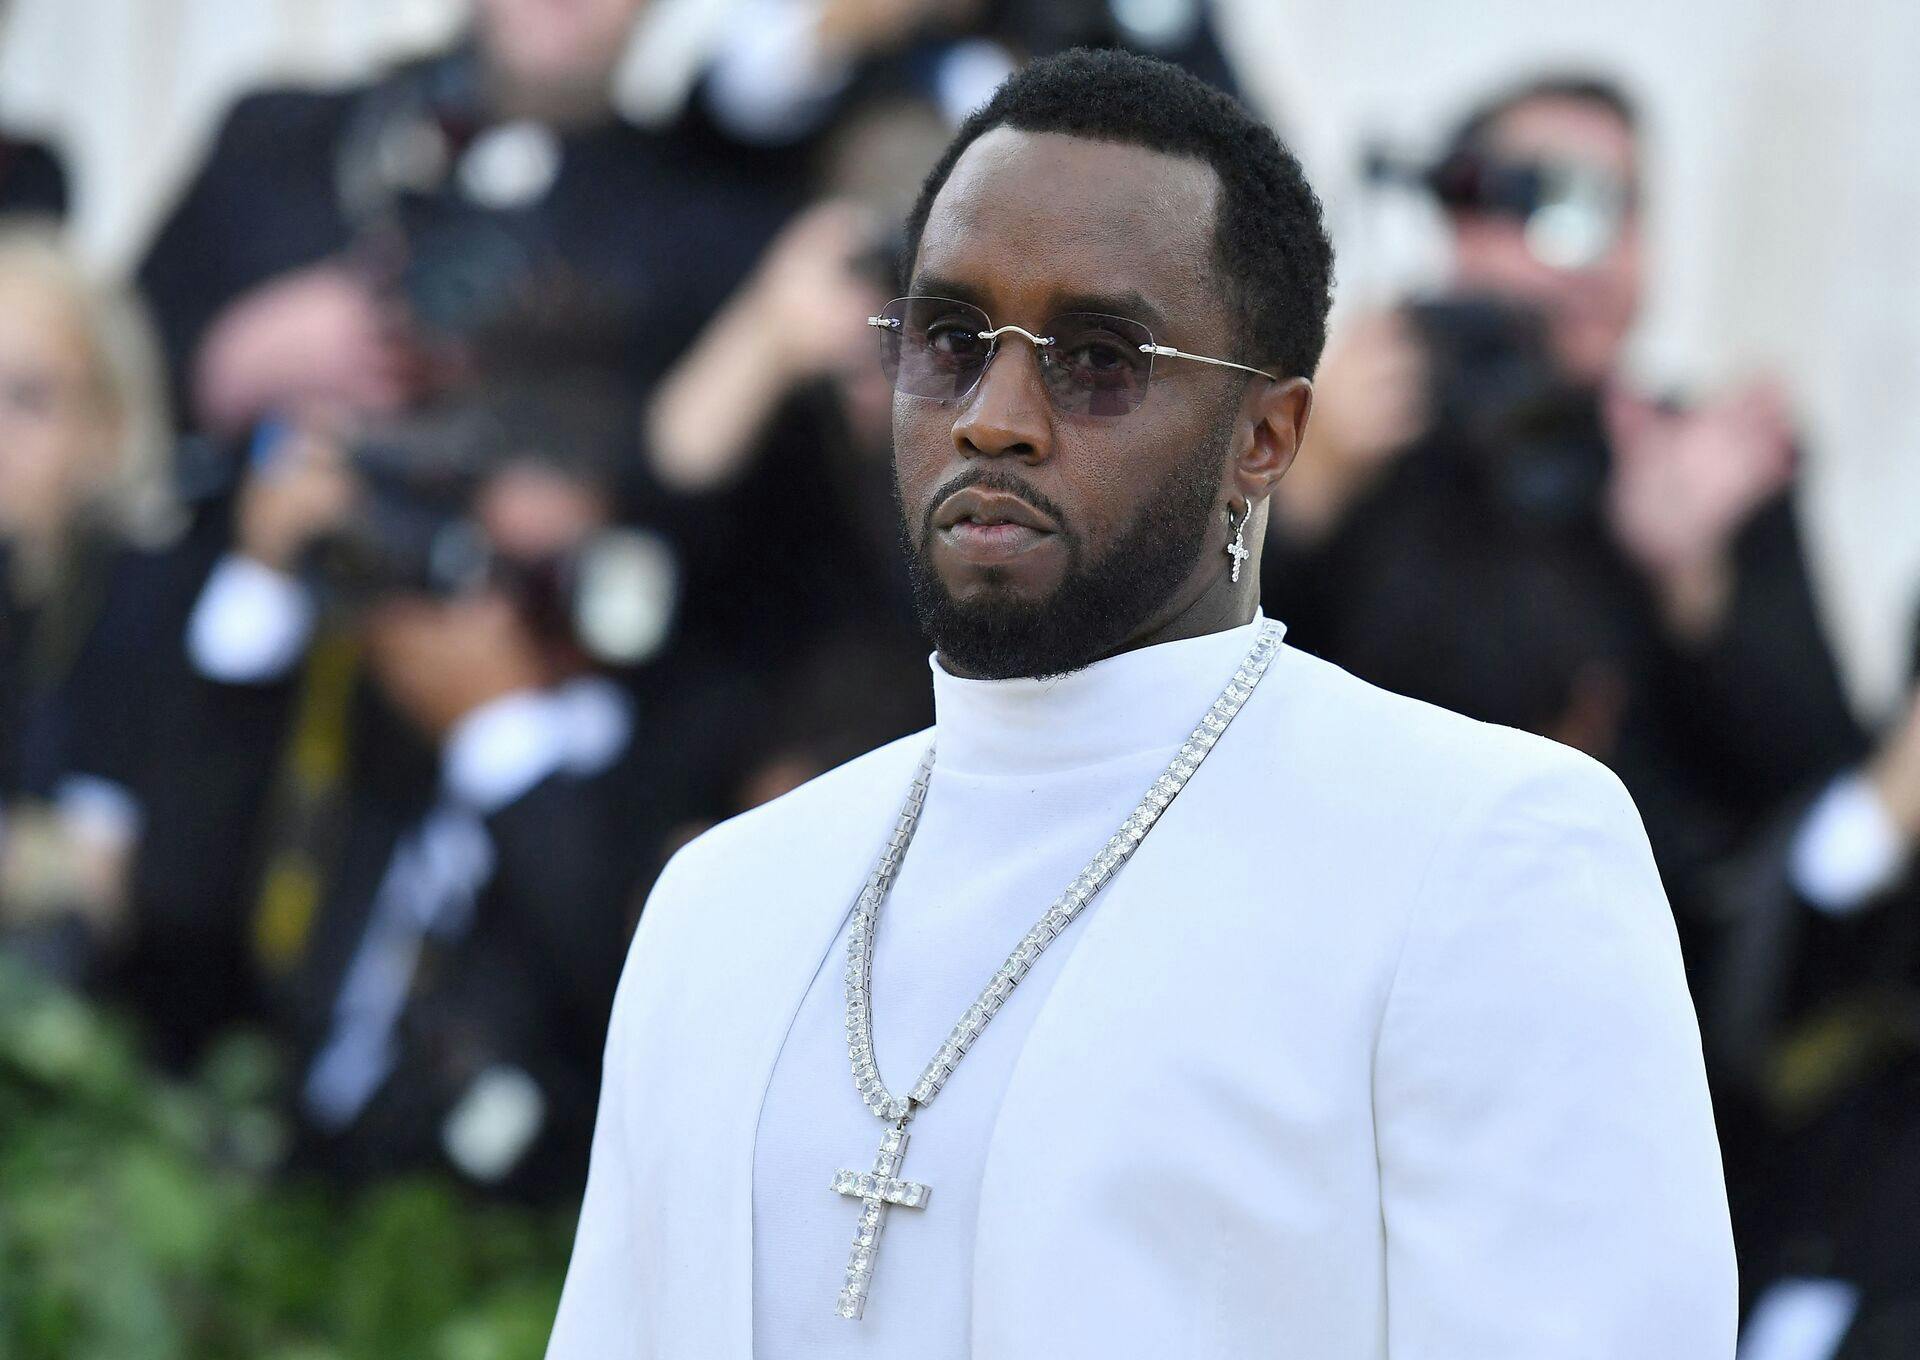 (FILES) Sean Combs 'P. Diddy' arrives for the 2018 Met Gala on May 7, 2018, at the Metropolitan Museum of Art in New York. Once hip hop's flashy impresario credited with commercializing the genre, Sean "Diddy" Combs has seen his star plunge as federal authorities raid his homes amid sex trafficking accusations and assault lawsuits. (Photo by ANGELA WEISS / AFP)